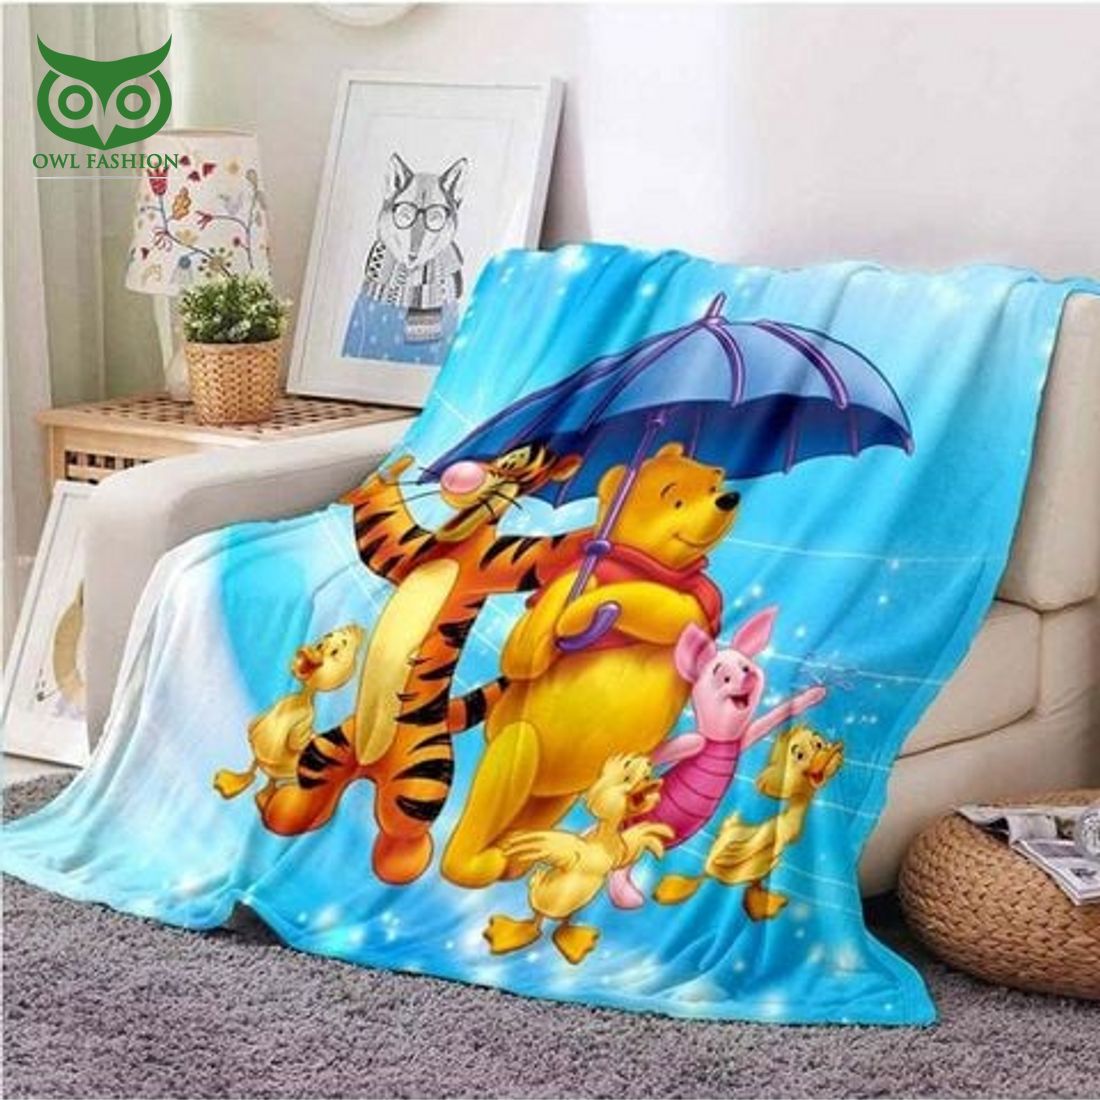 Winnie The Pooh Characters under Umbrella Fleece Blanket It is more than cute